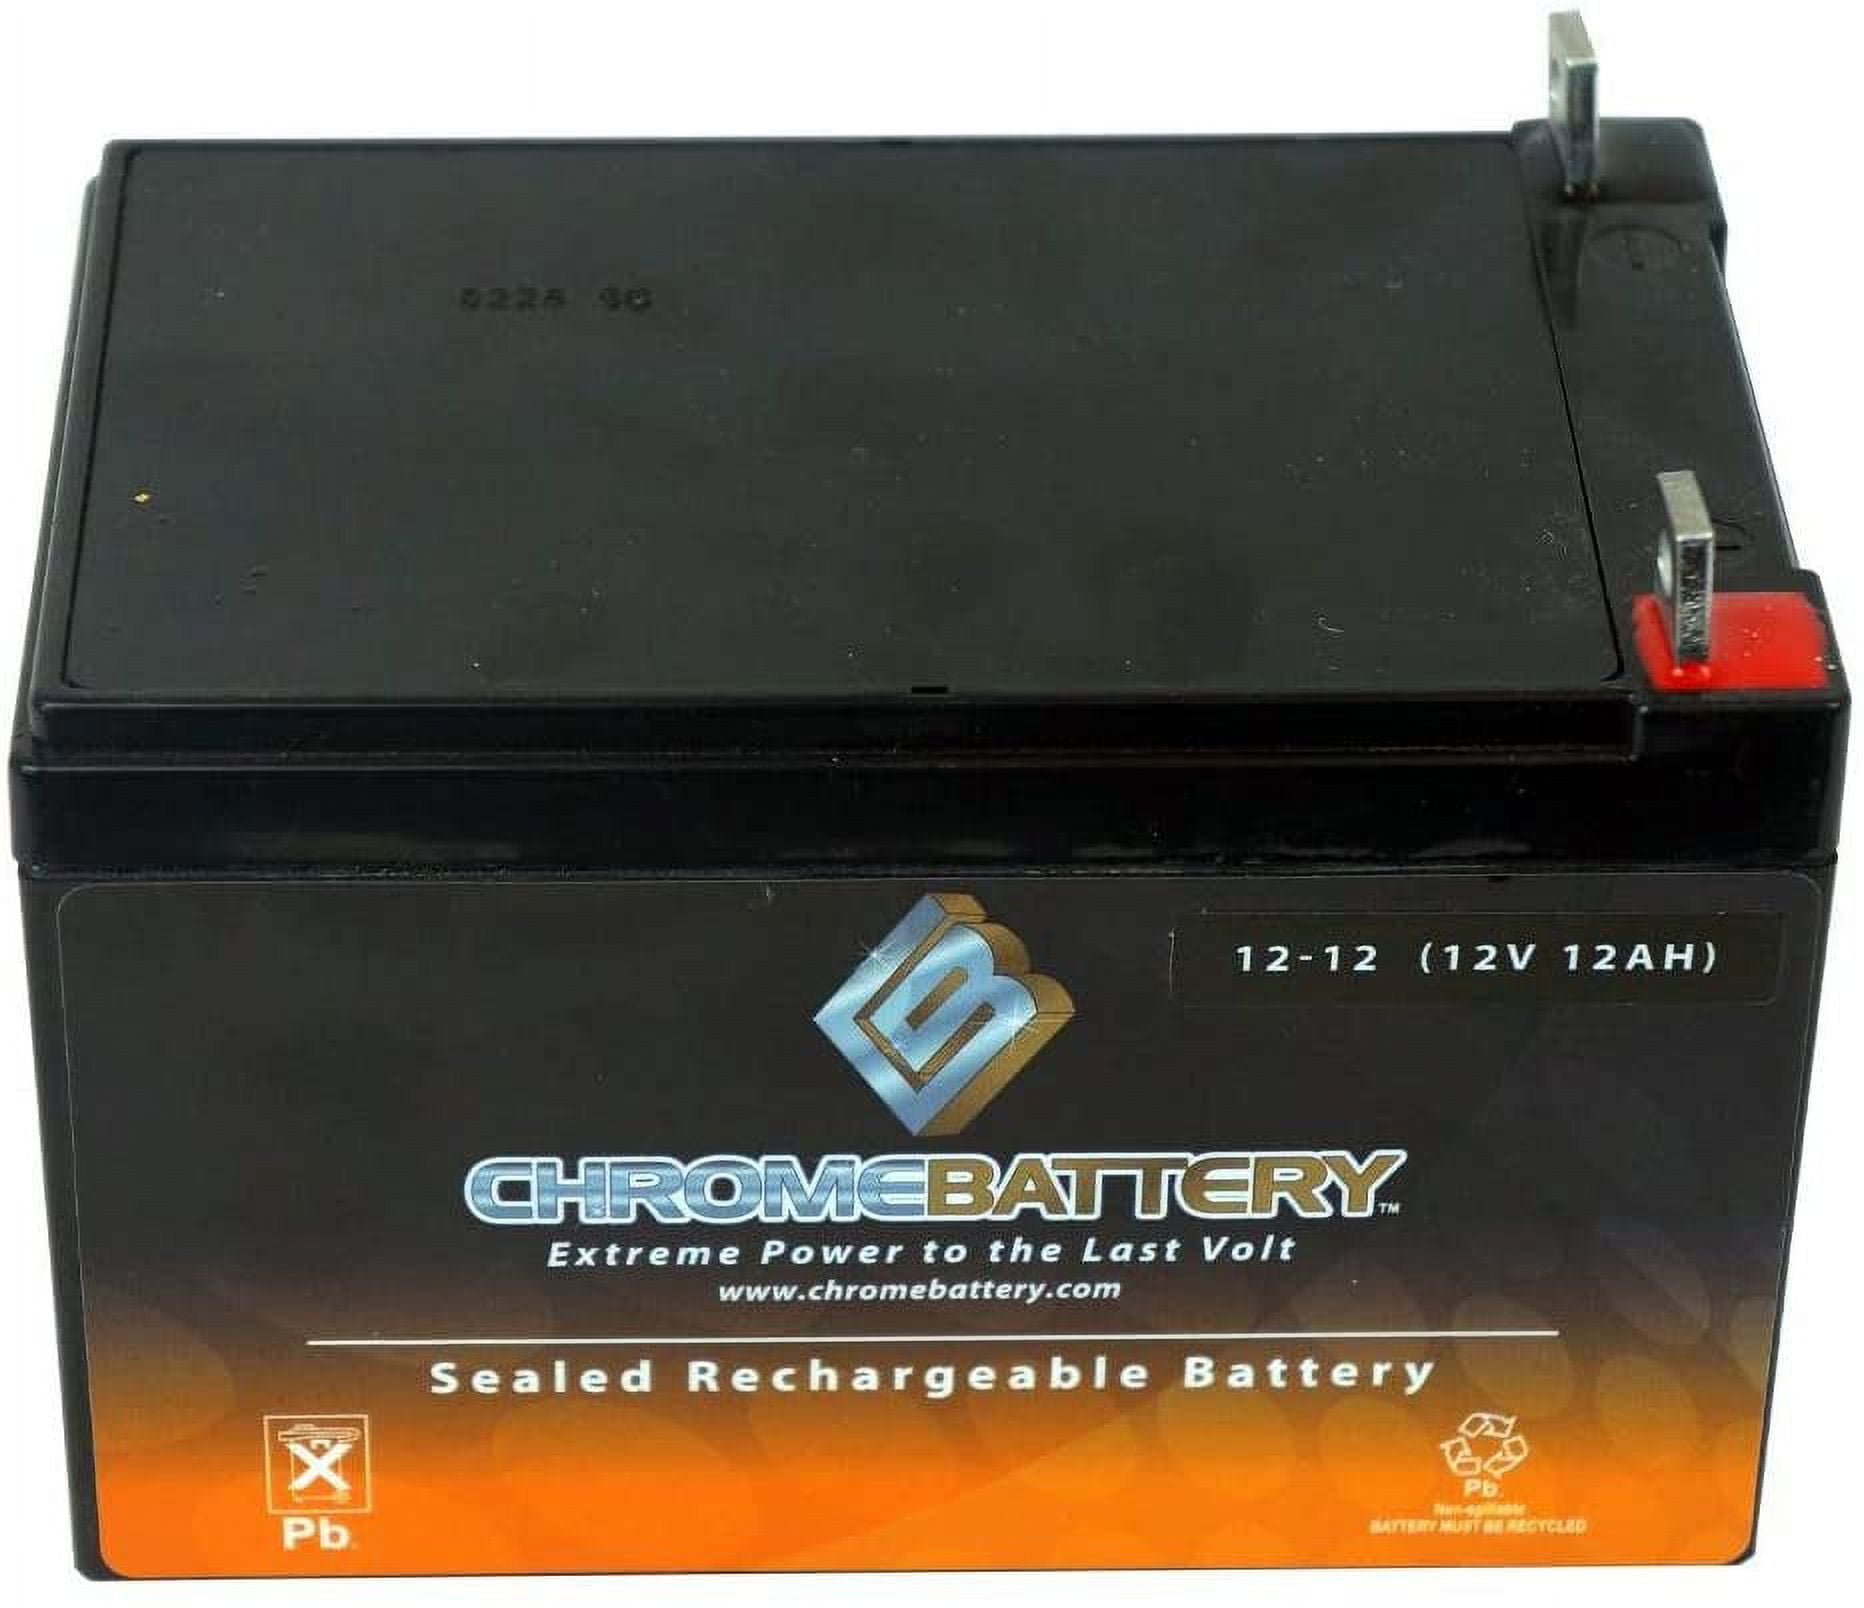 Chrome Battery 12V (12 Volts) 12Ah Rechargeable Sealed Lead Acid Battery -  T3 Nut And Bolt Terminals - for Snapper Lawnmower Battery: Gp-2929-02 